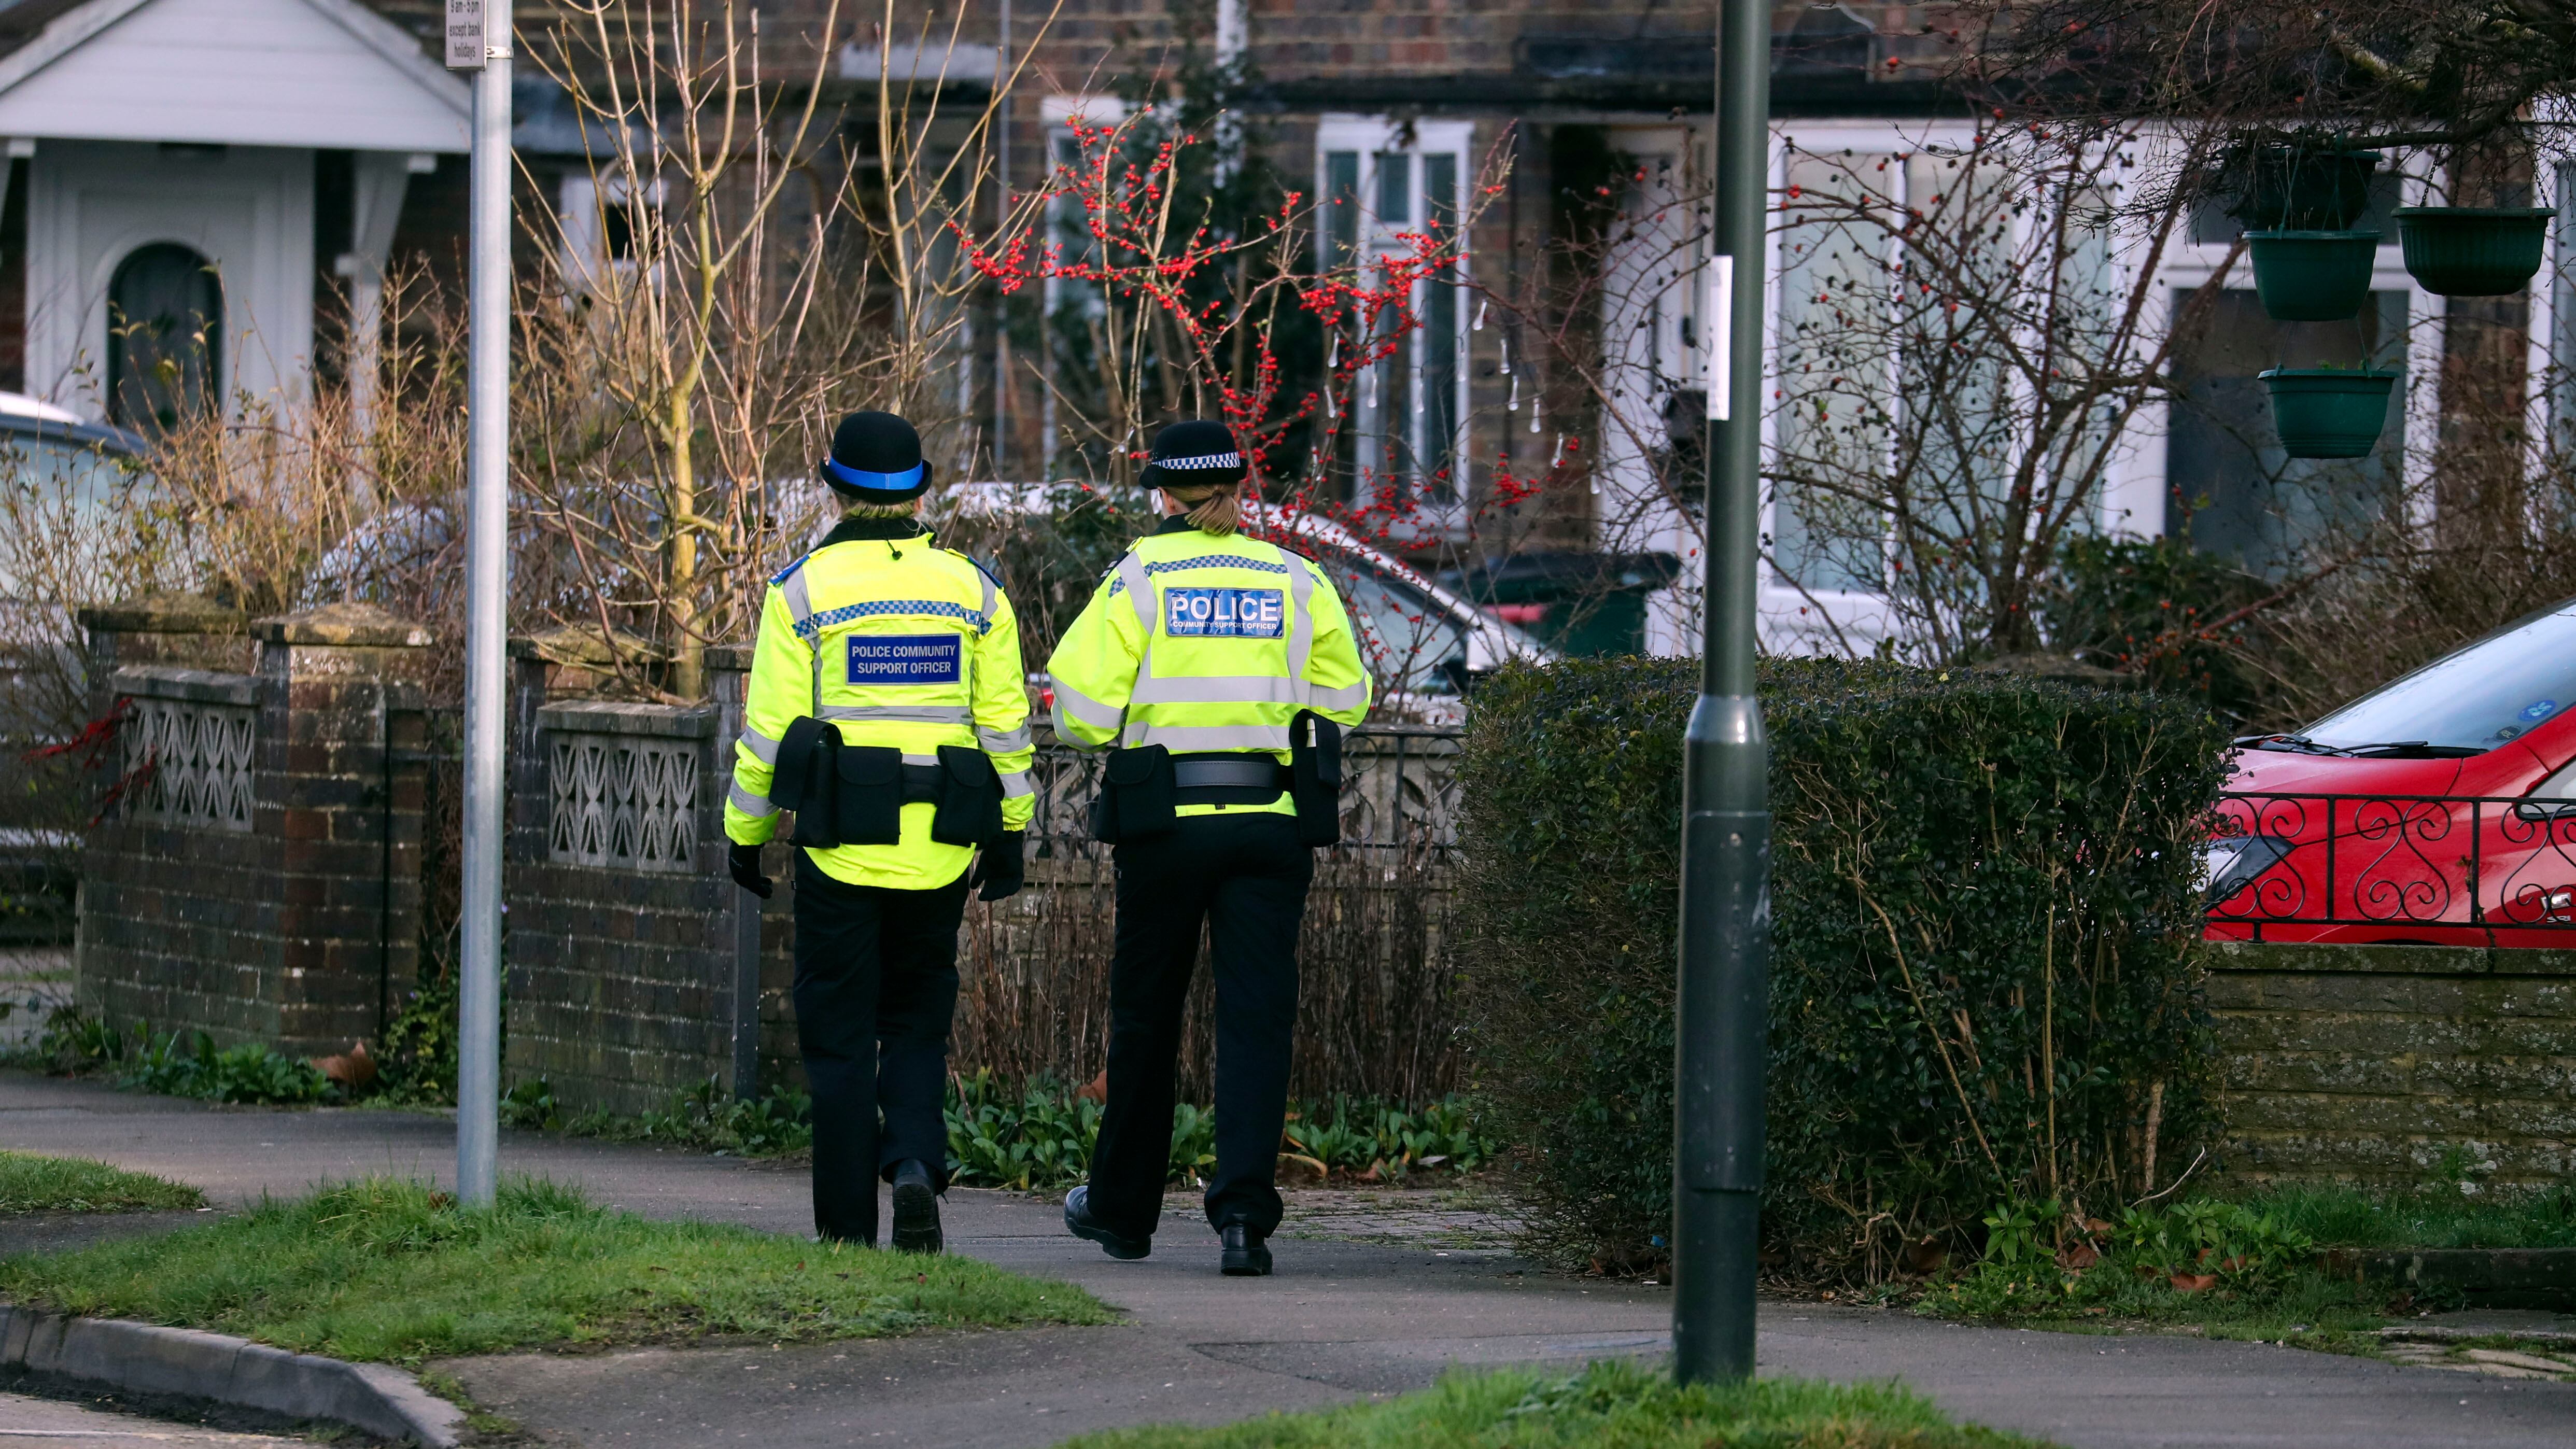 Labour has vowed to put more police officers back on the beat